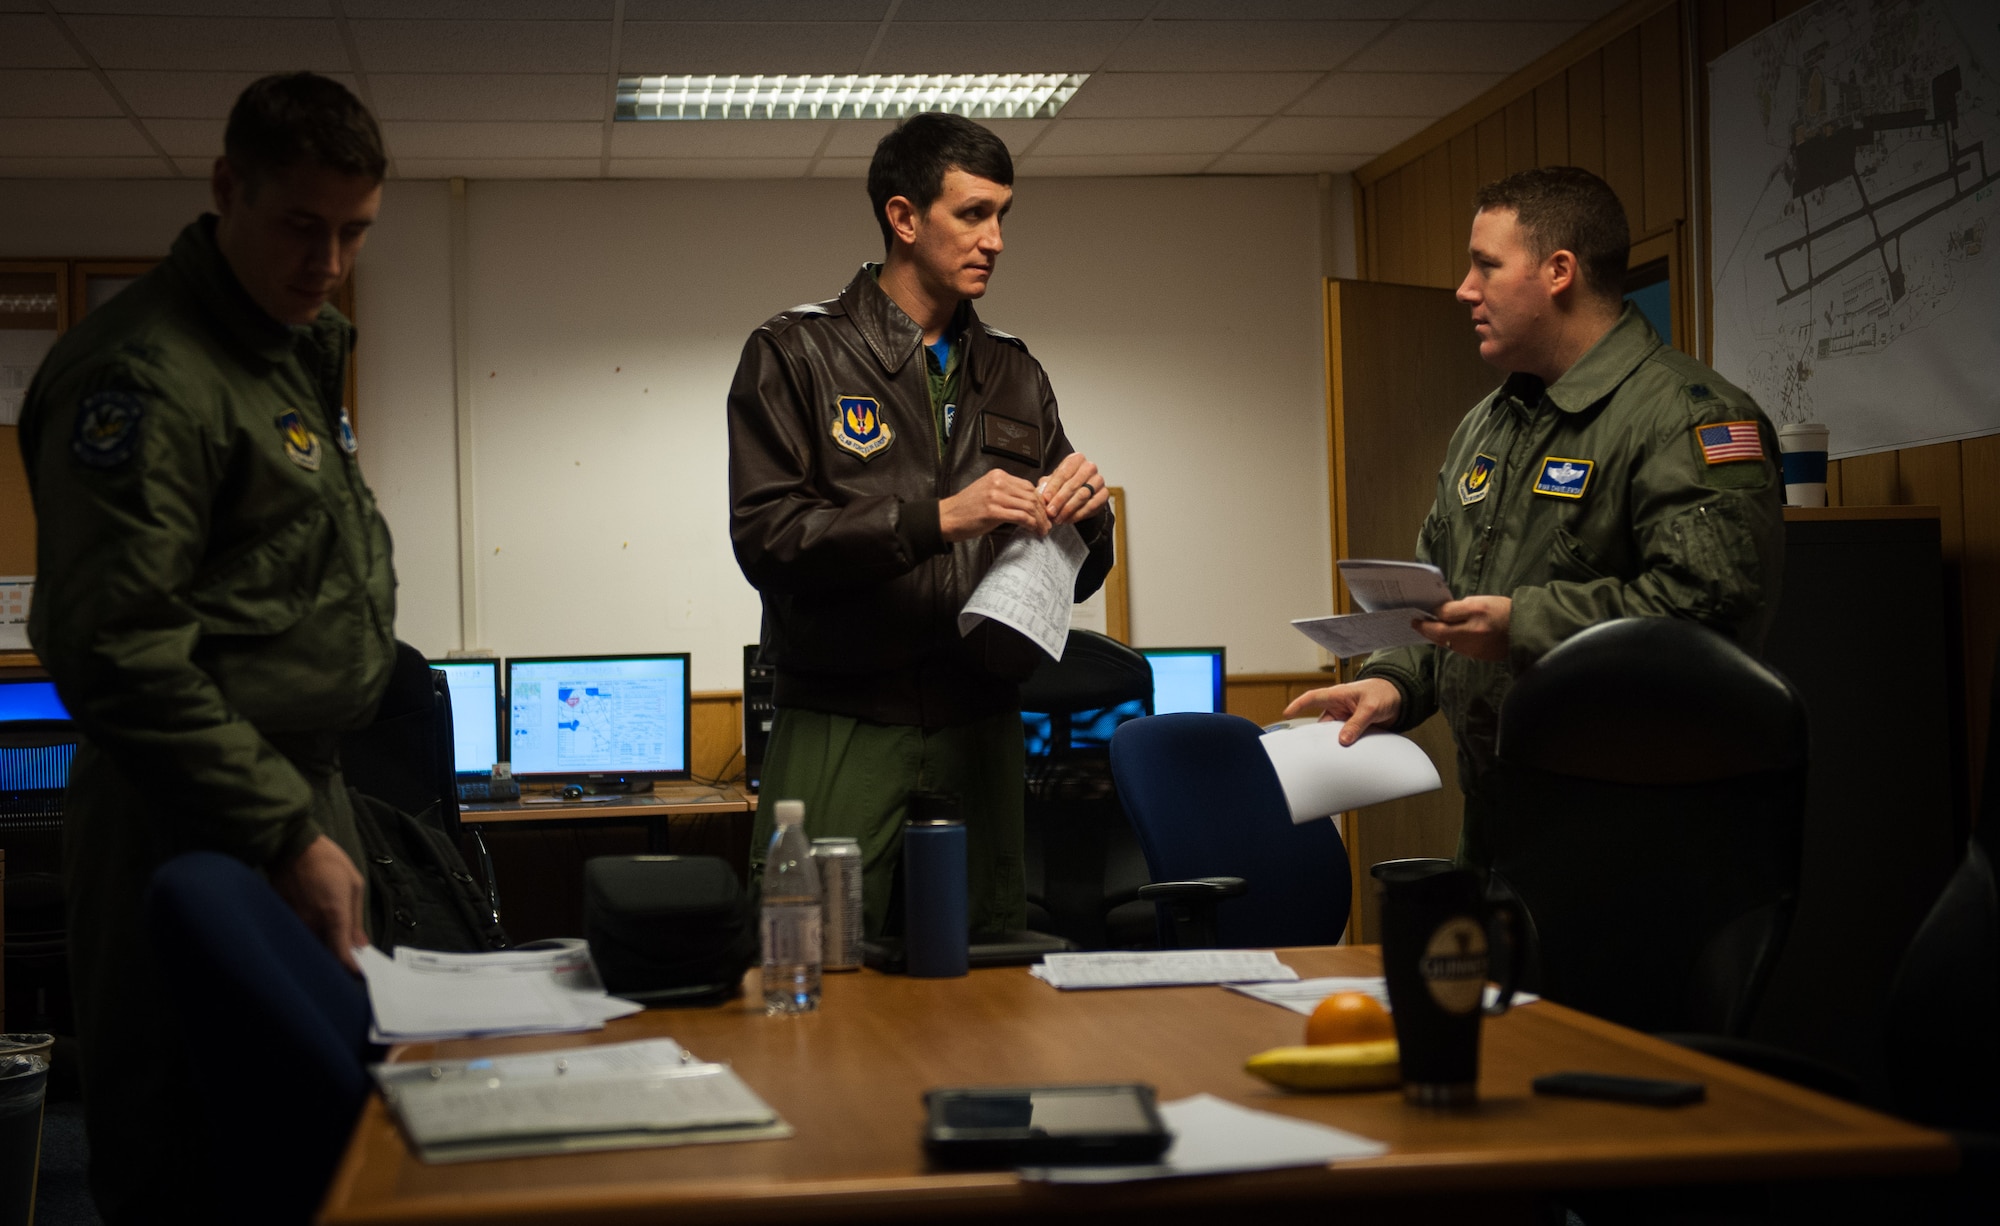 Lt. Col. Ryan Chmielewski, 37th Airlift Squadron director of operations, coordinates with Capt. Kenneth Jubb, 37th AS pilot, on their unit’s 75th anniversary flight at Ramstein Air Base, Germany, Feb. 10, 2017. 37th AS pilots took to the skies to honor all those before them who have worn the unit patch. (U.S. Air Force photo by Senior Airman Lane T. Plummer)